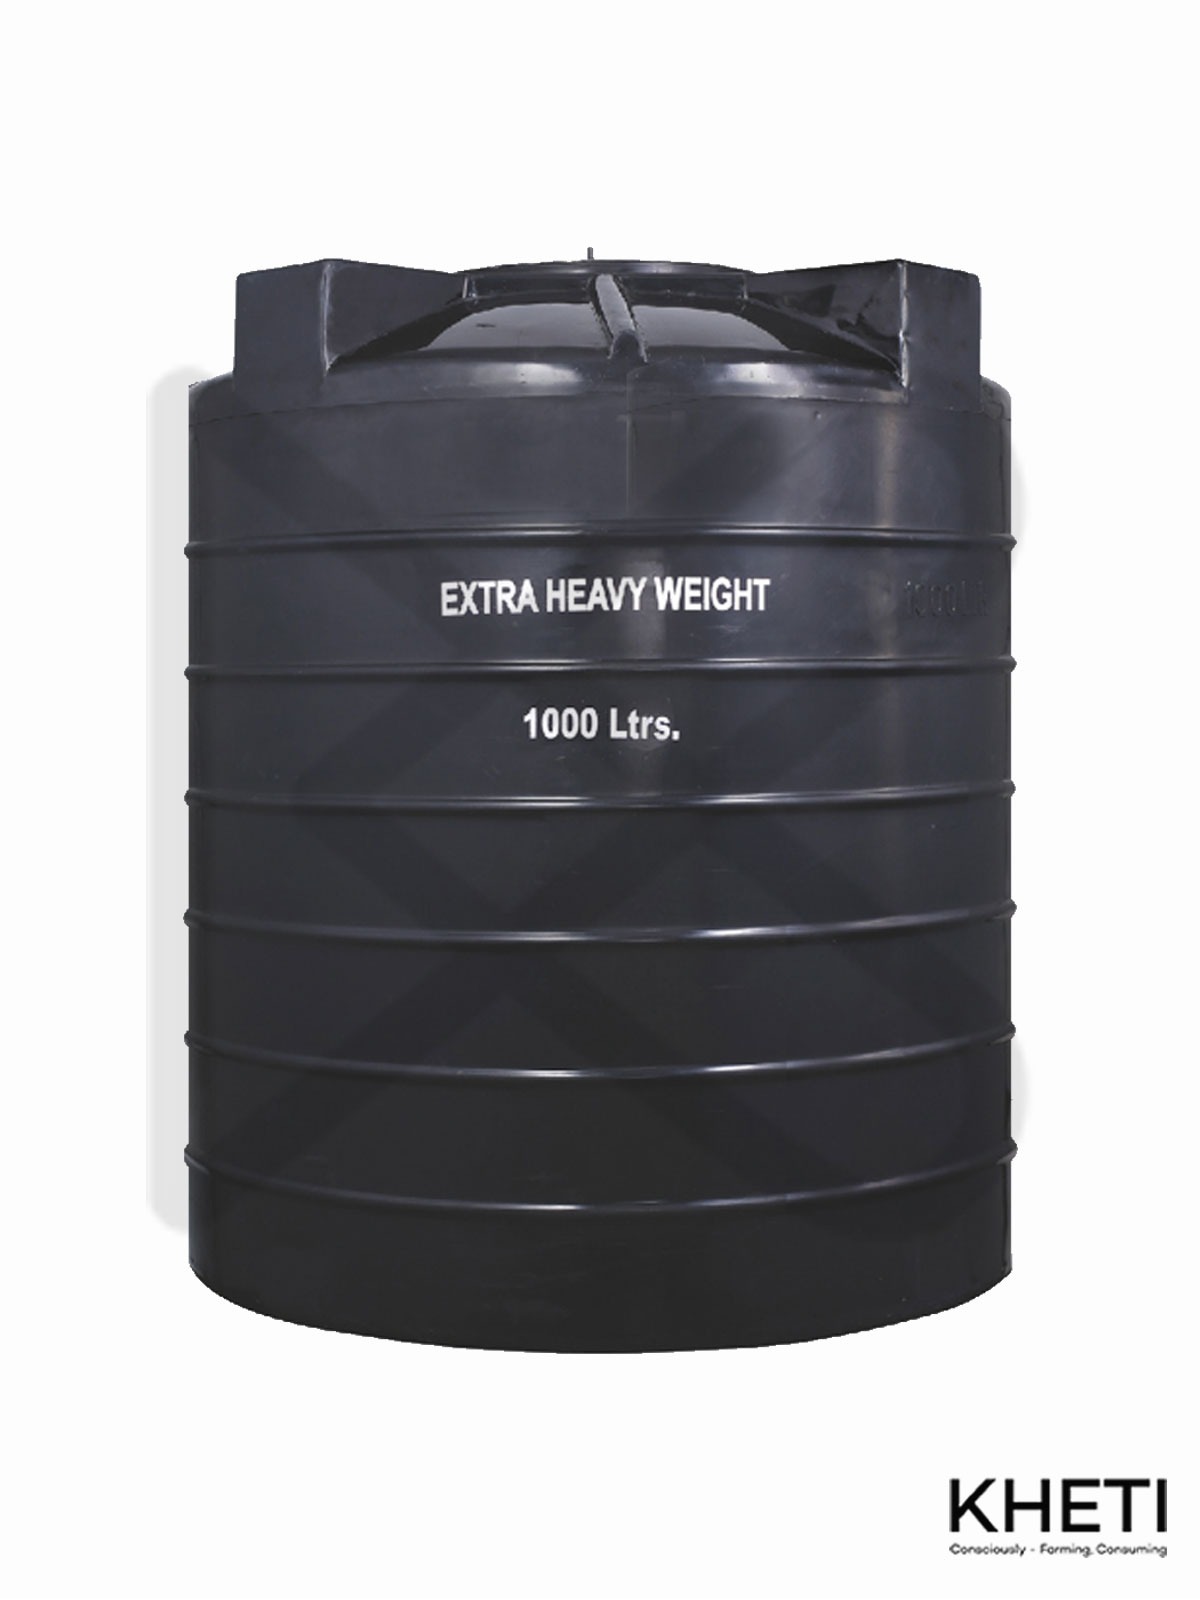 Water drum 1000 ltr